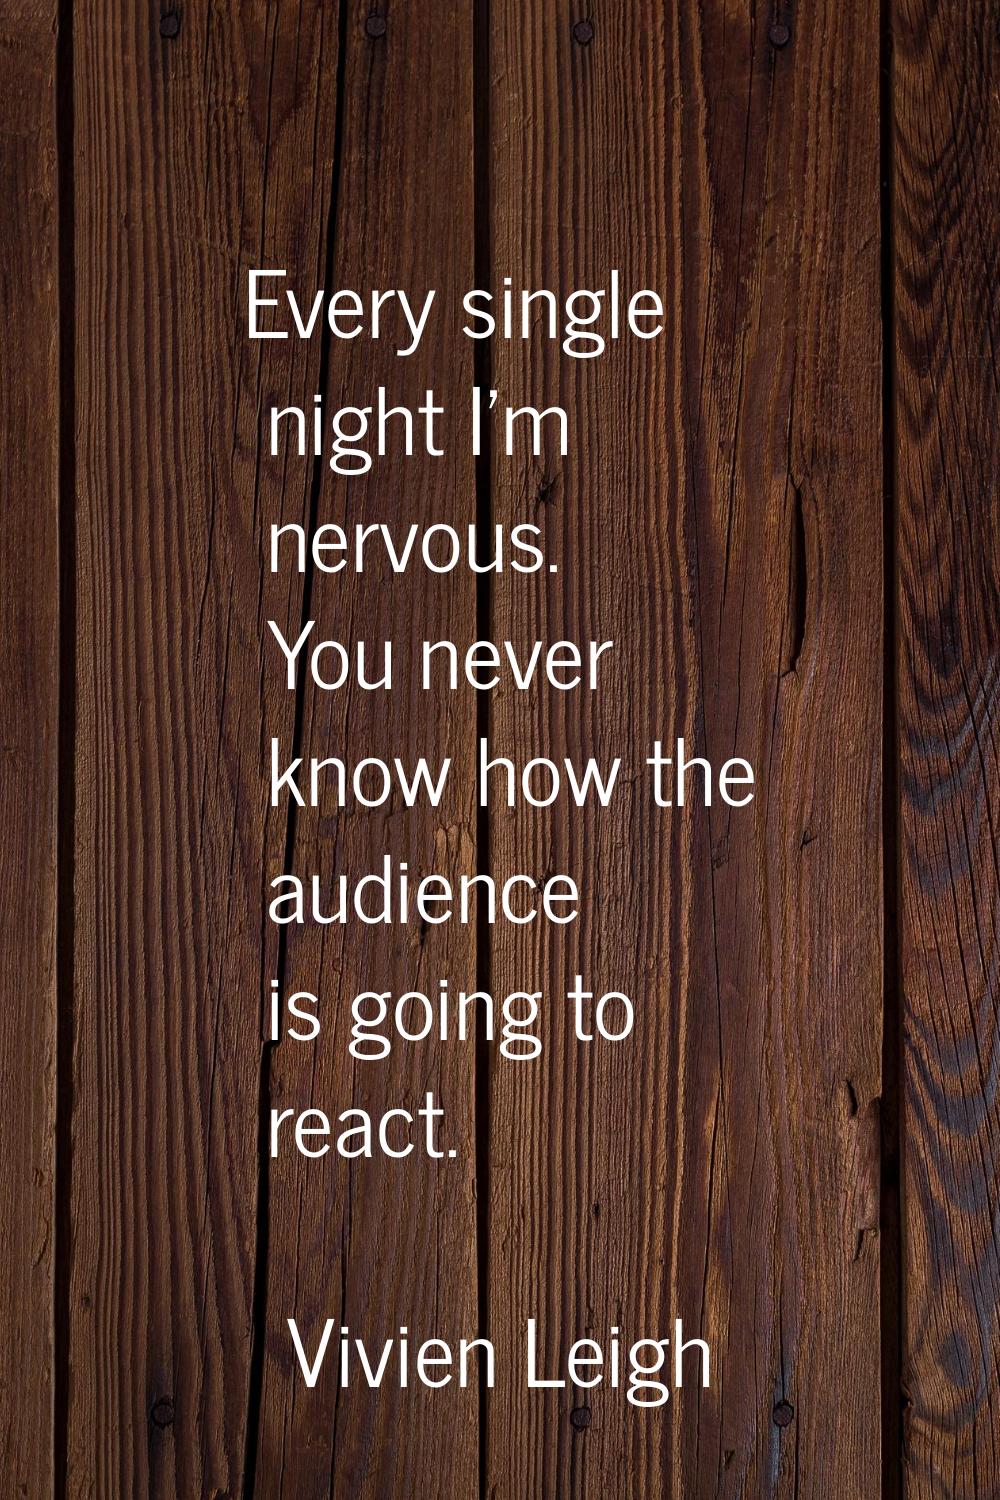 Every single night I'm nervous. You never know how the audience is going to react.